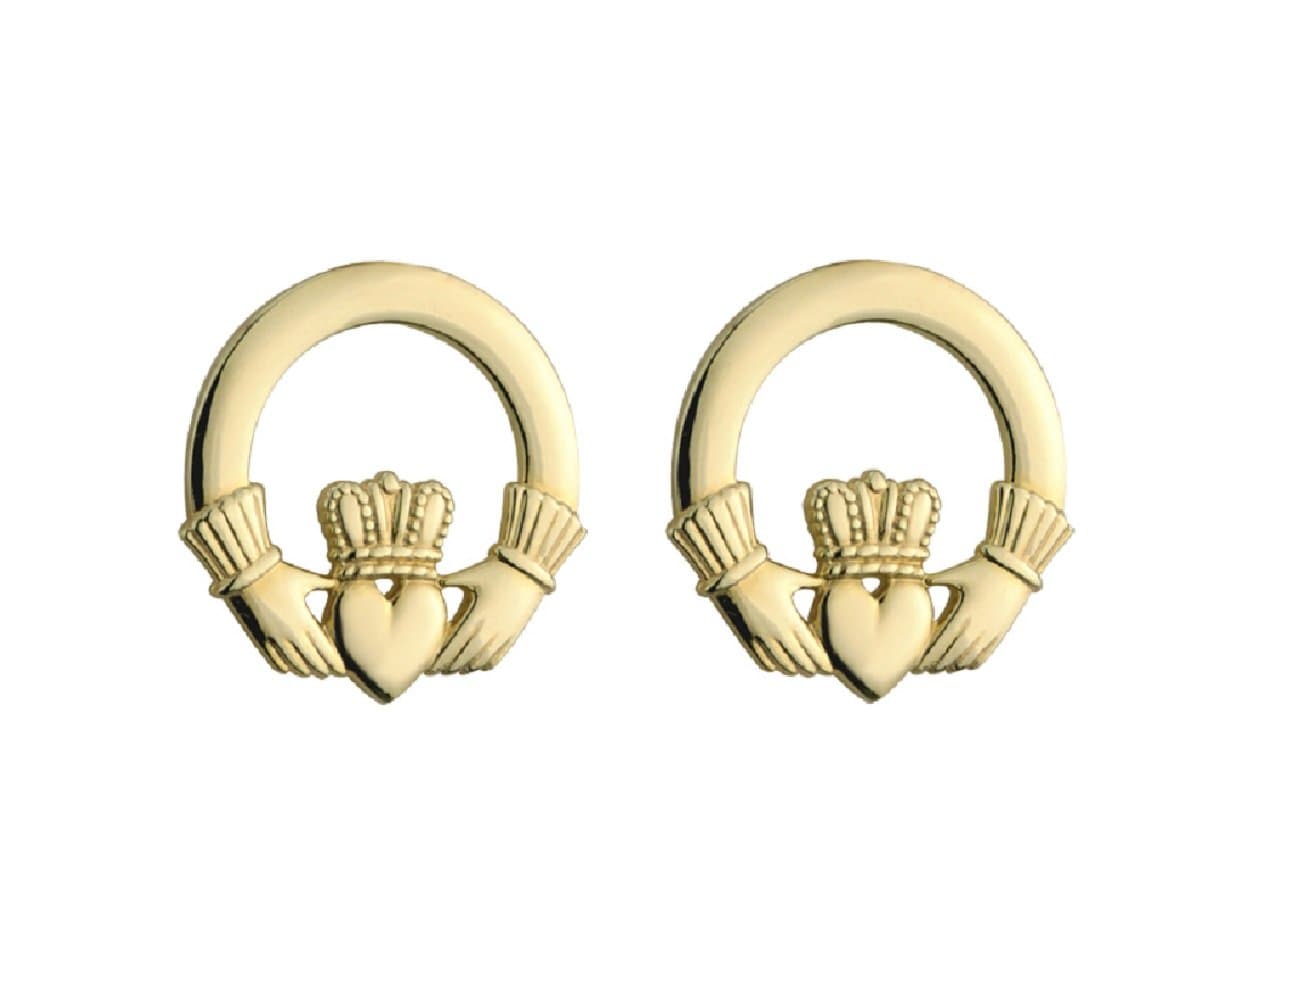 10K Gold Claddagh Stud Earrings Small by Our Maker-Partner in Co. Dublin